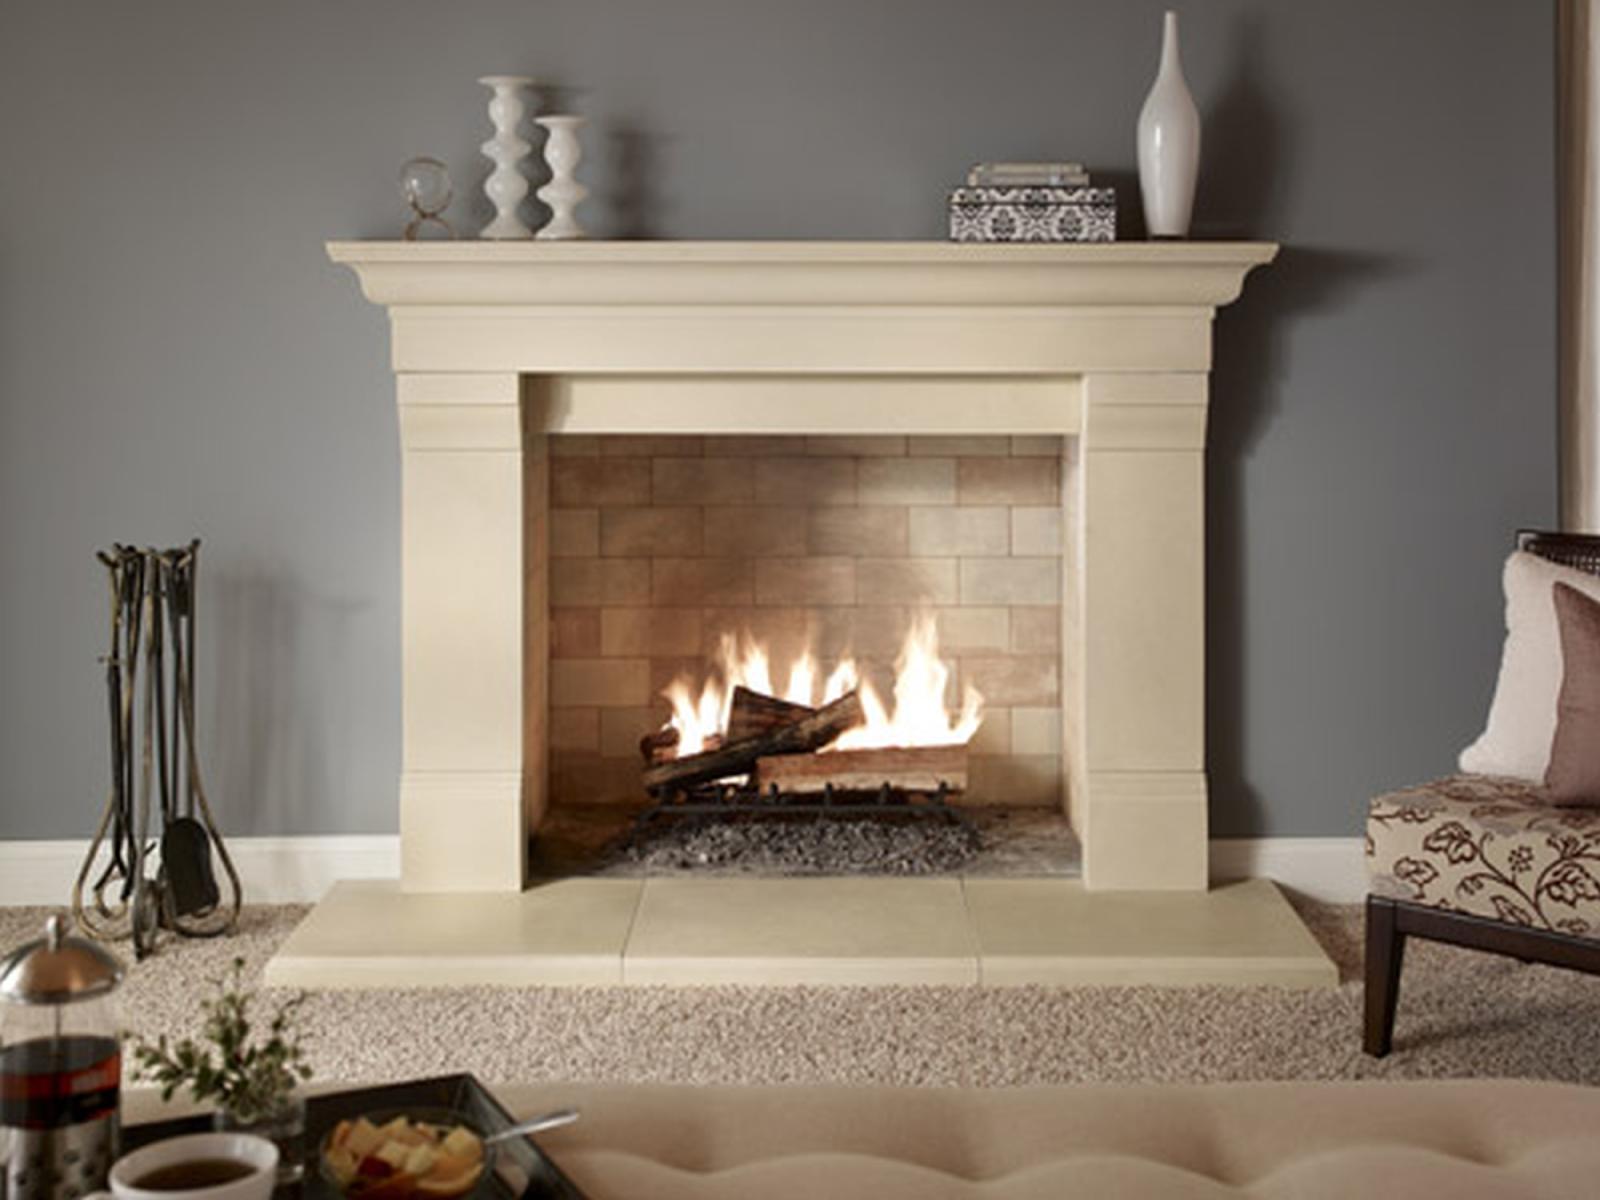 Houzz Fireplace Mantels Elegant Fireplace Mantels and Surrounds Ideas Photo 1 Pictures Of